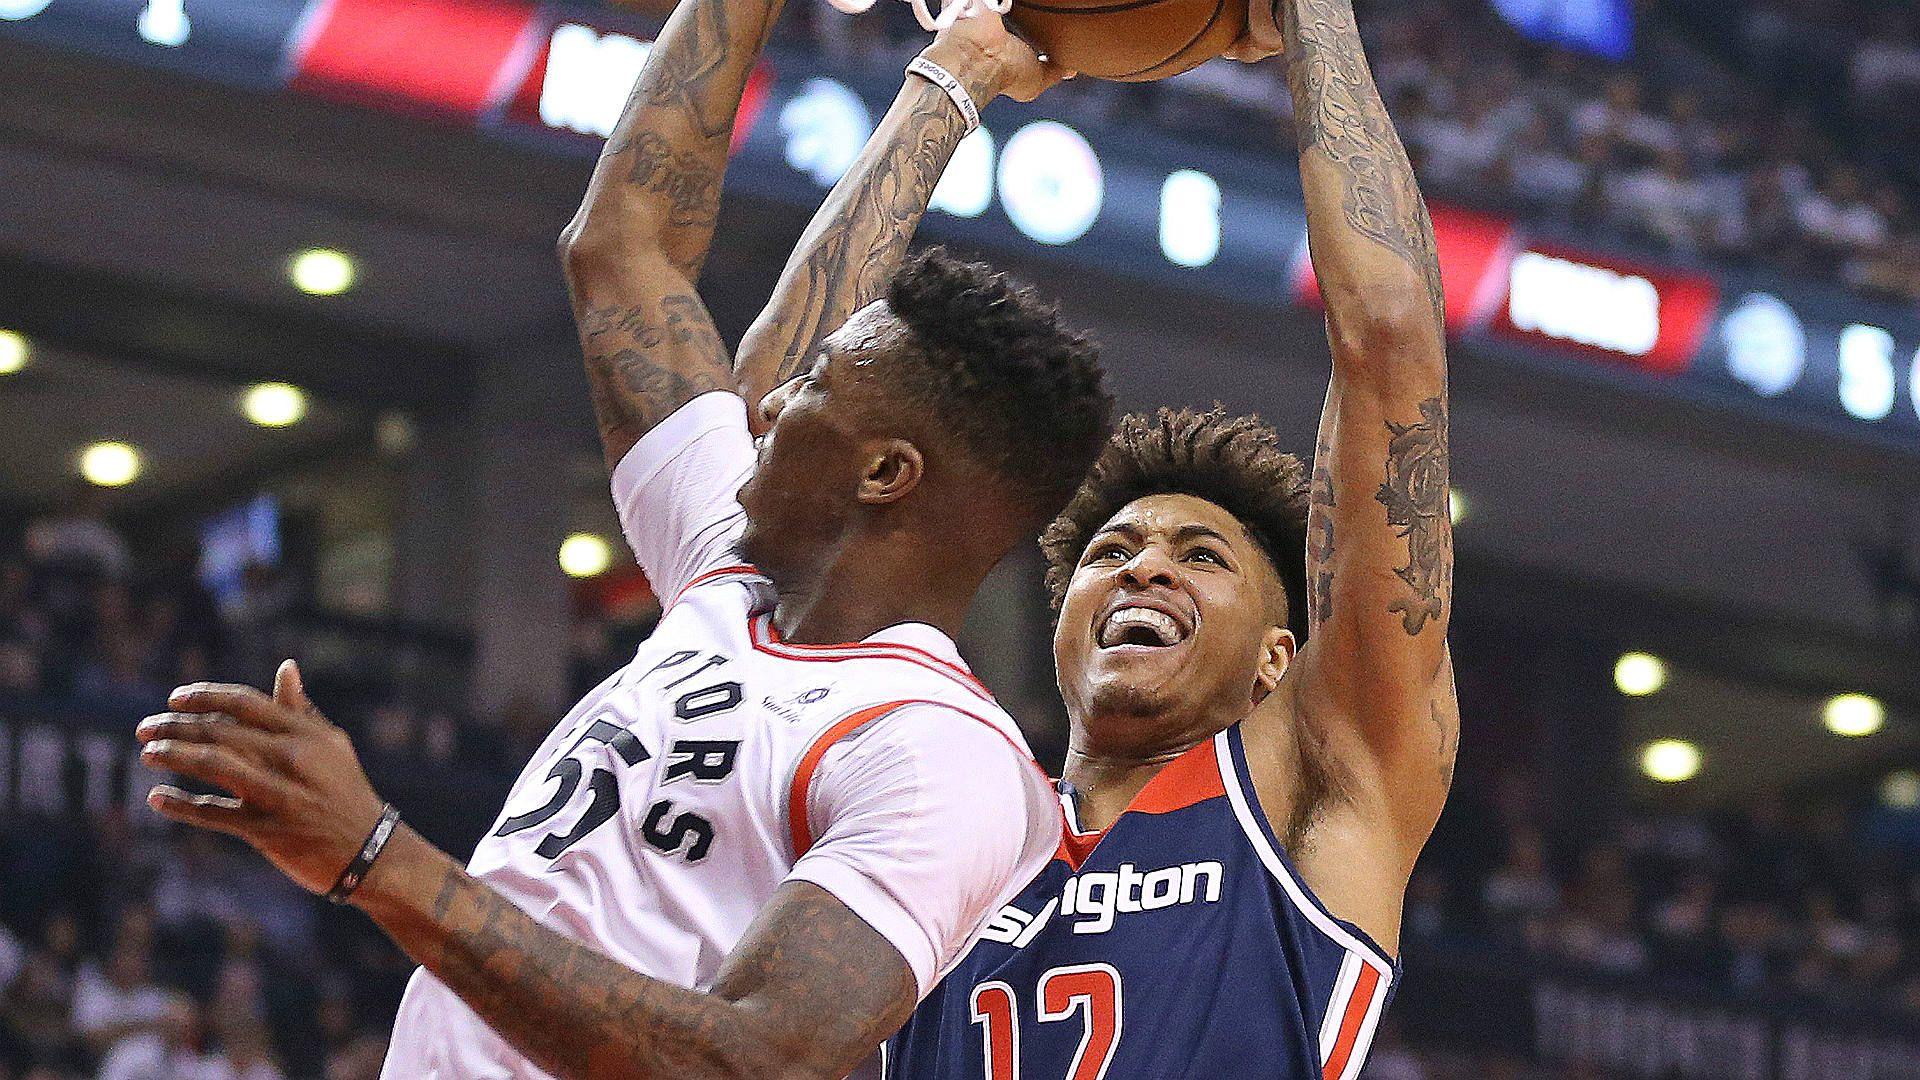 NBA playoffs 2018: Kelly Oubre Jr.'s war of words with Delon Wright